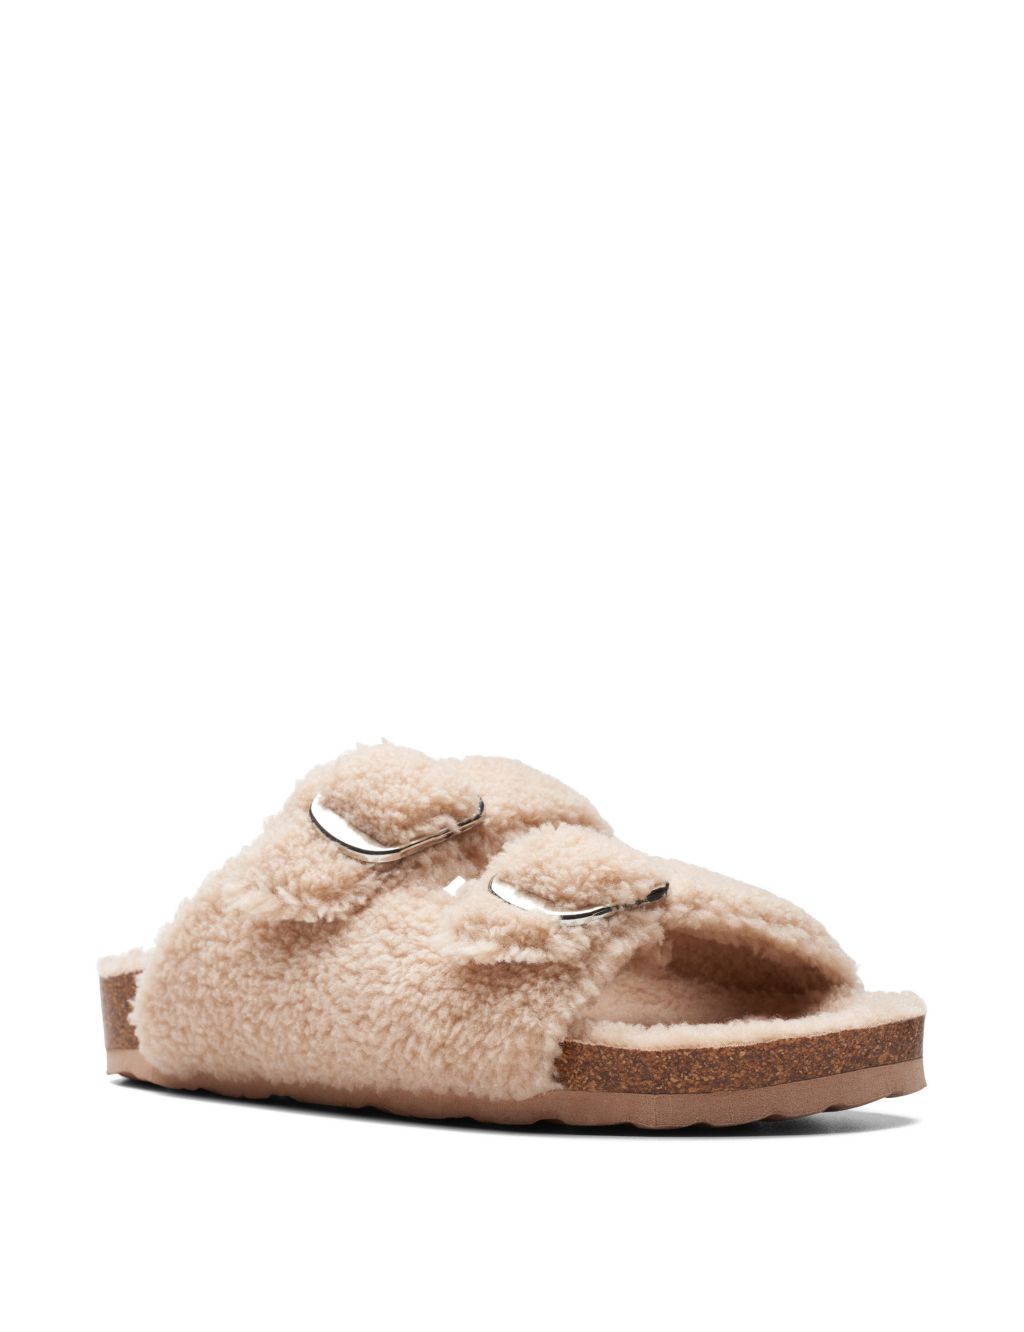 Faux Shearling Buckle Slider Slippers image 2